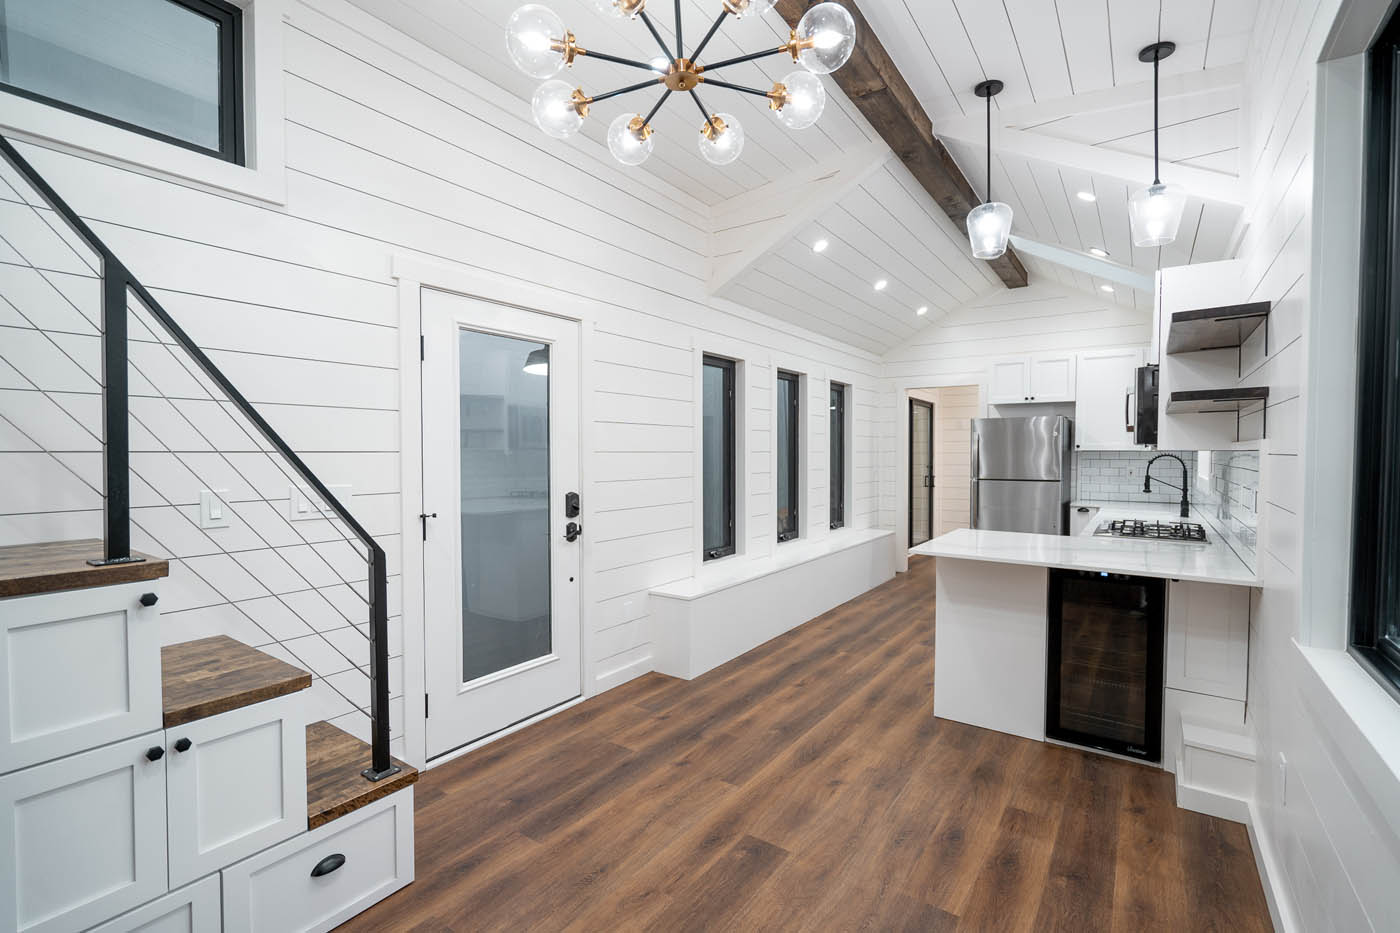 A modern home with dark floors and white kitchen cabinets, provided by one of the best Salt Lake City tiny house companies.